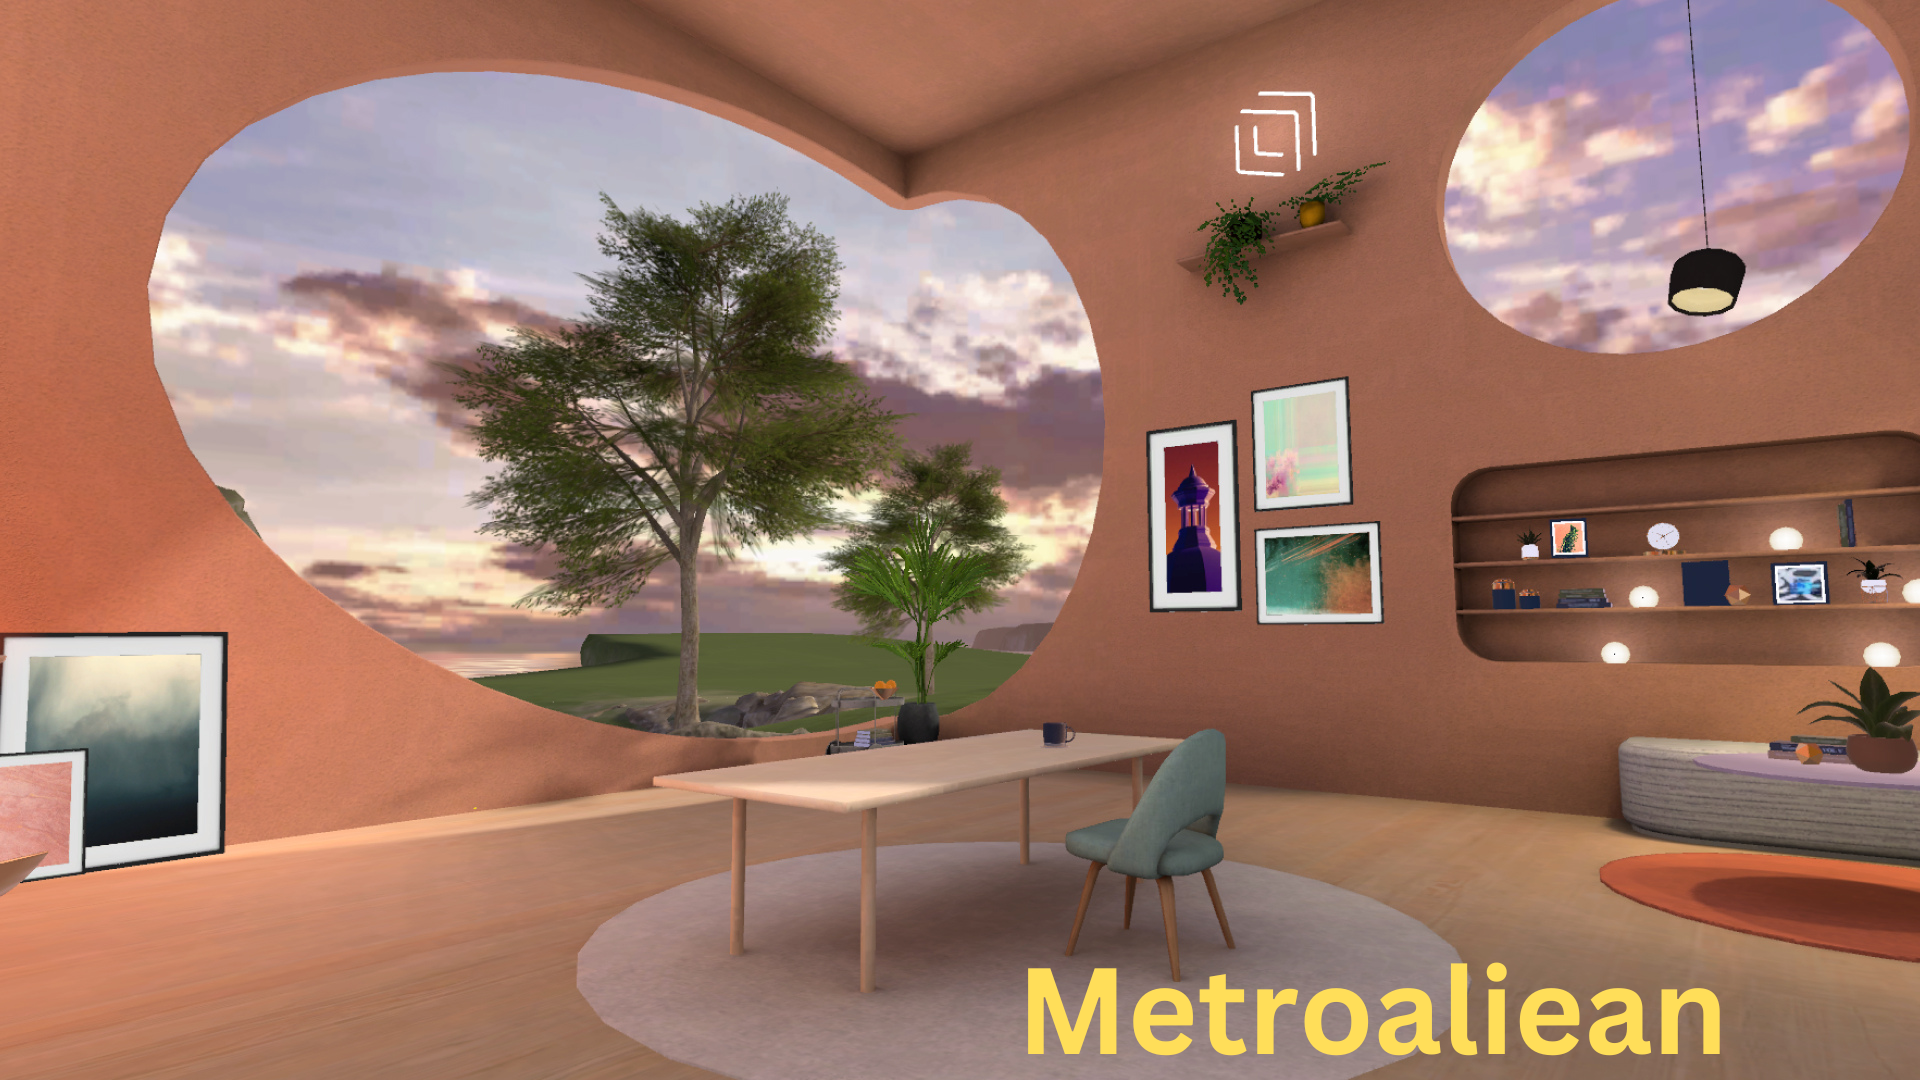 Go Out Without Leaving Your Home in metaverse